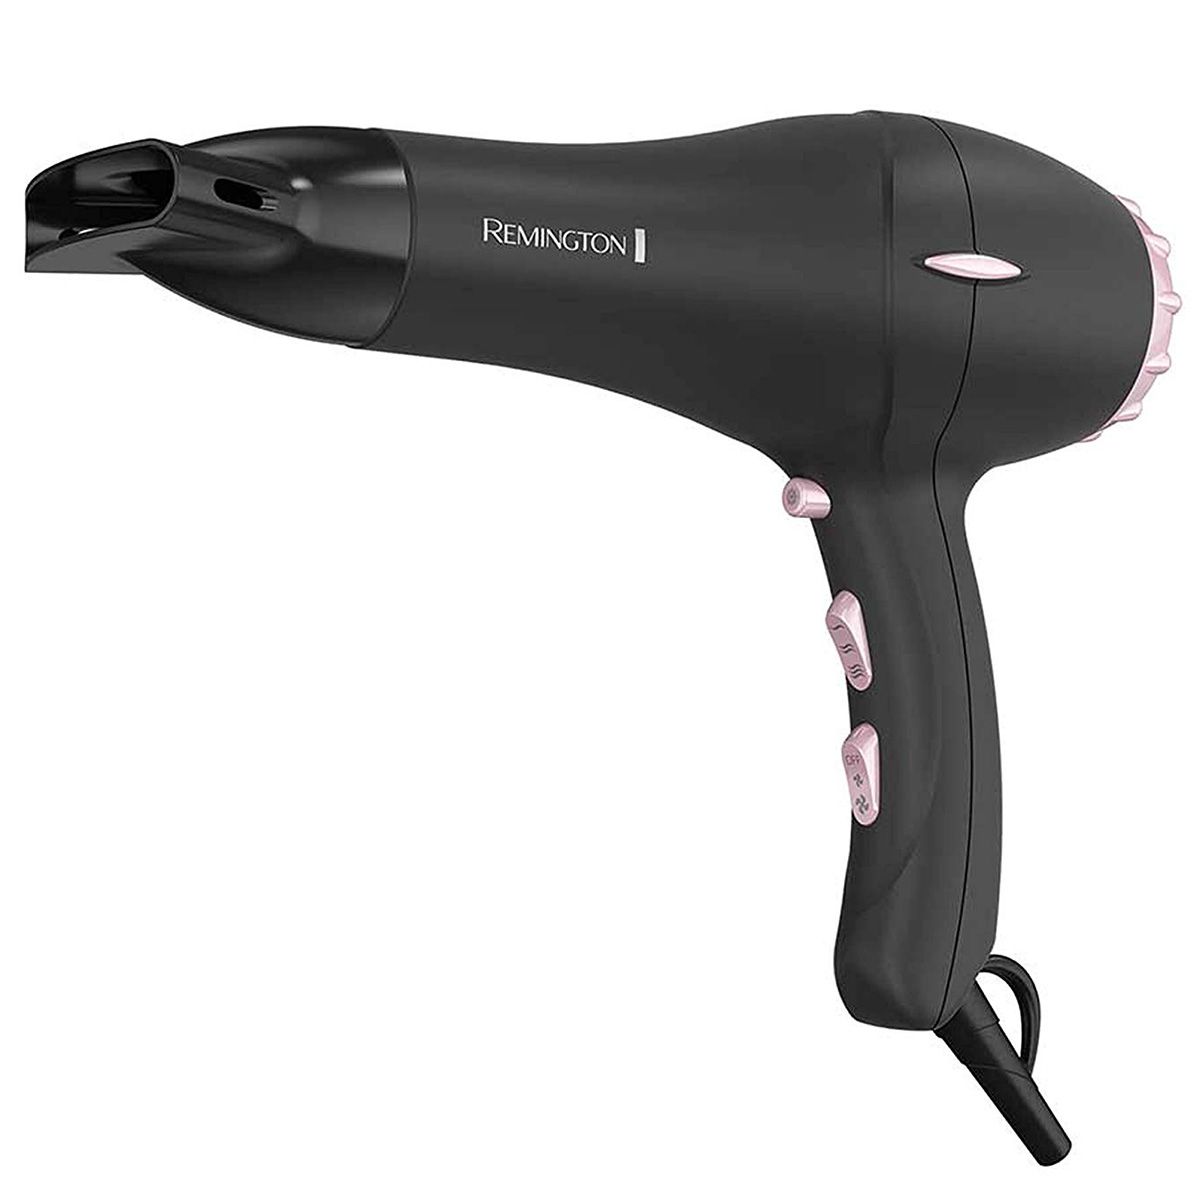 Remington Pro Hair Dryer with Pearl Ceramic Technology